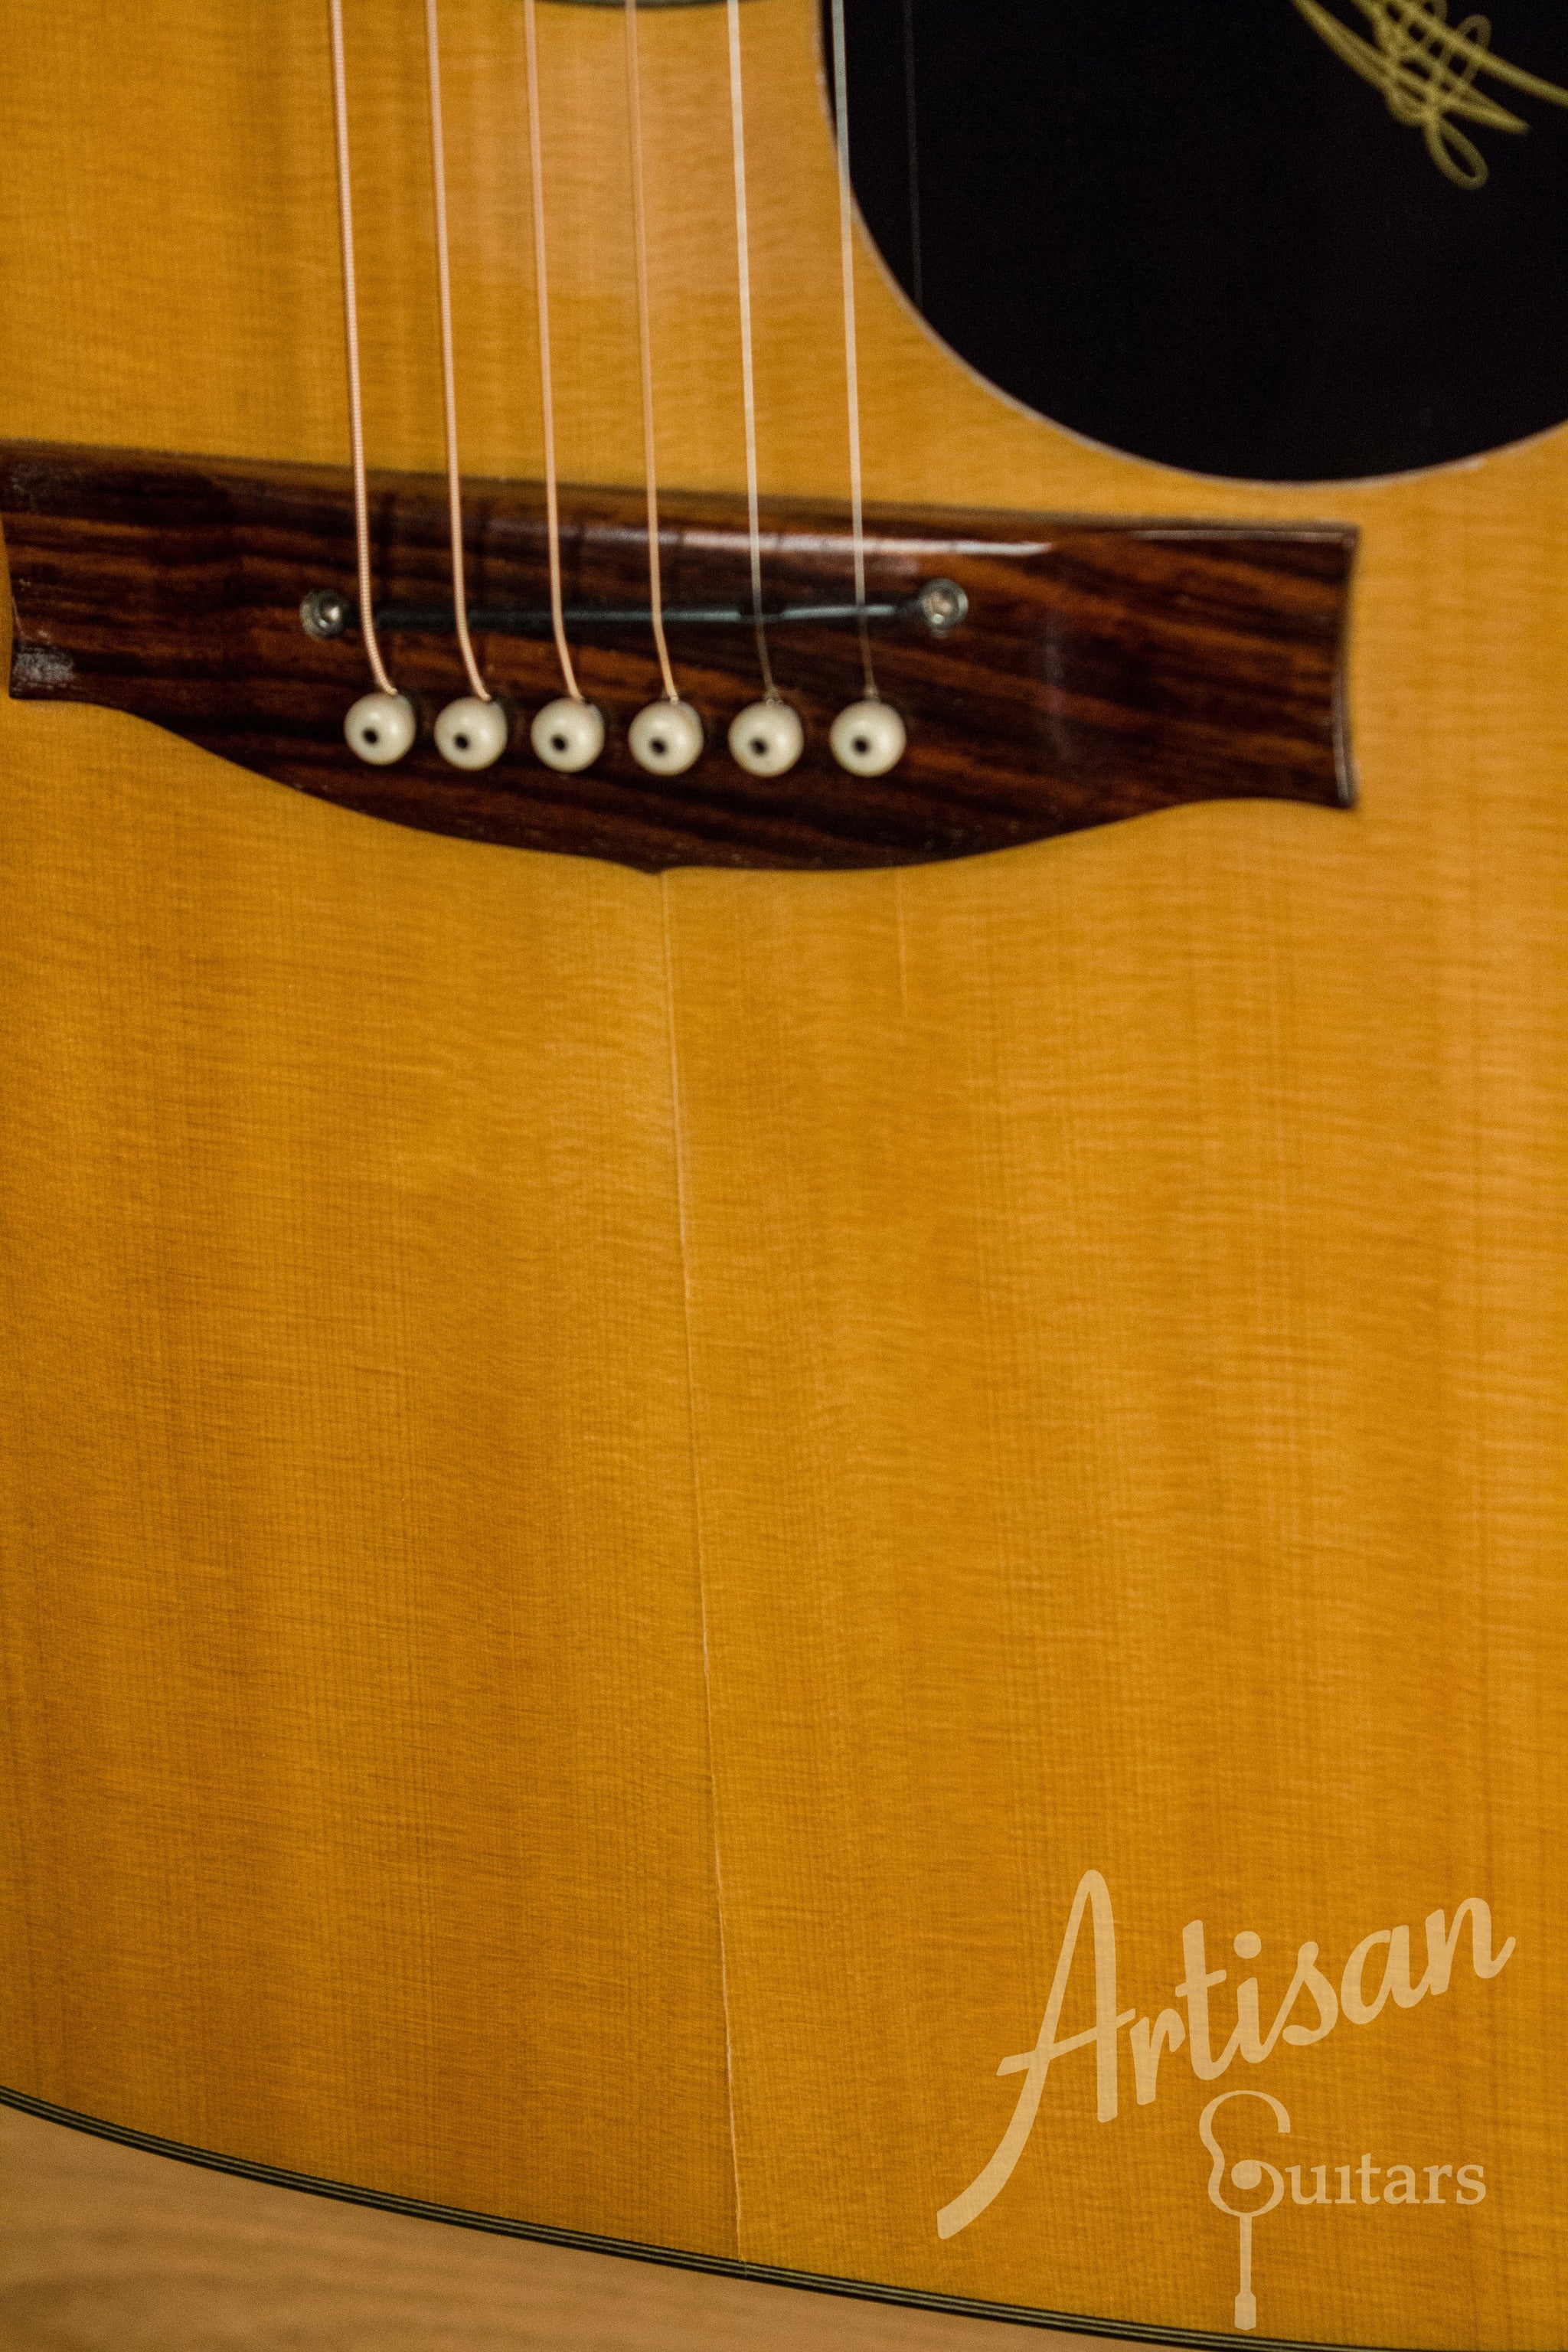 Maton TE2 Guitar Tommy Emmanuel Artist Sitka Spruce and Maple Pre-Owned 2010 ID-11213 - Artisan Guitars